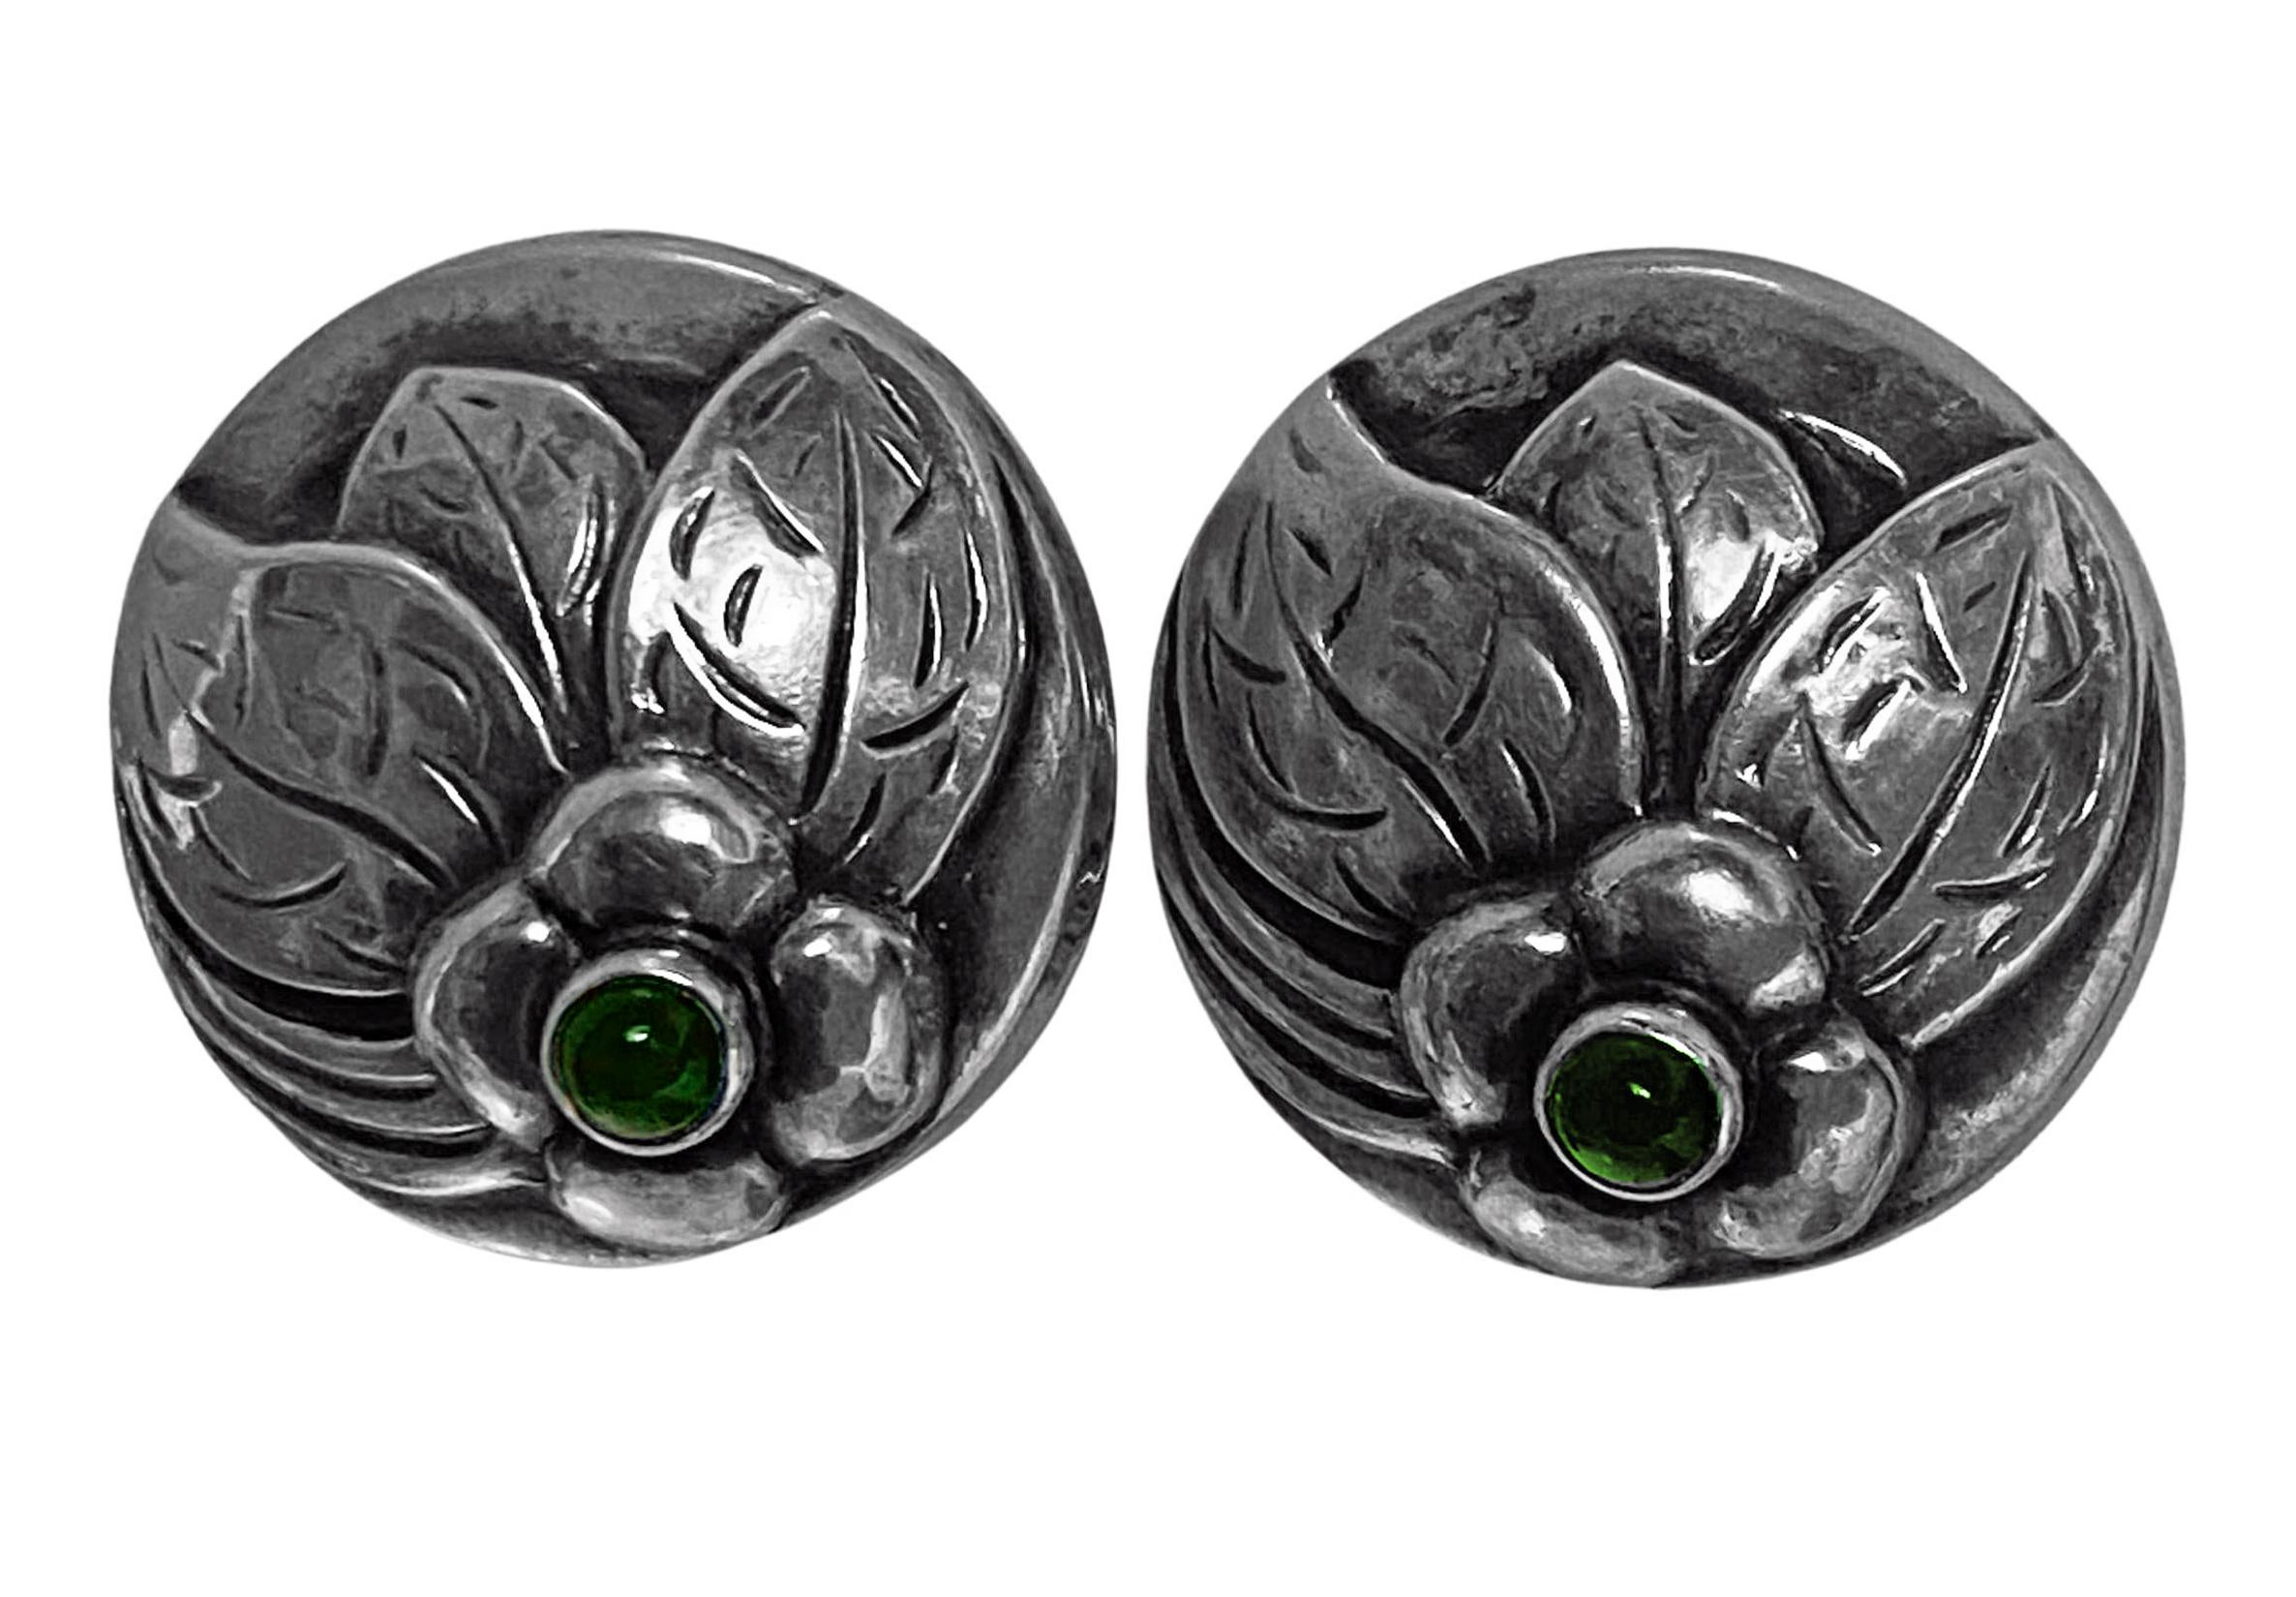 Georg Jensen chrysoprase sterling Earrings. Each of round three dimensional open petal bud form and bezel set at base with small cabochon chrysoprase. Diameter:18 mm. Later post fitments with silicone stoppers. Full Georg Jensen marks to reverse.